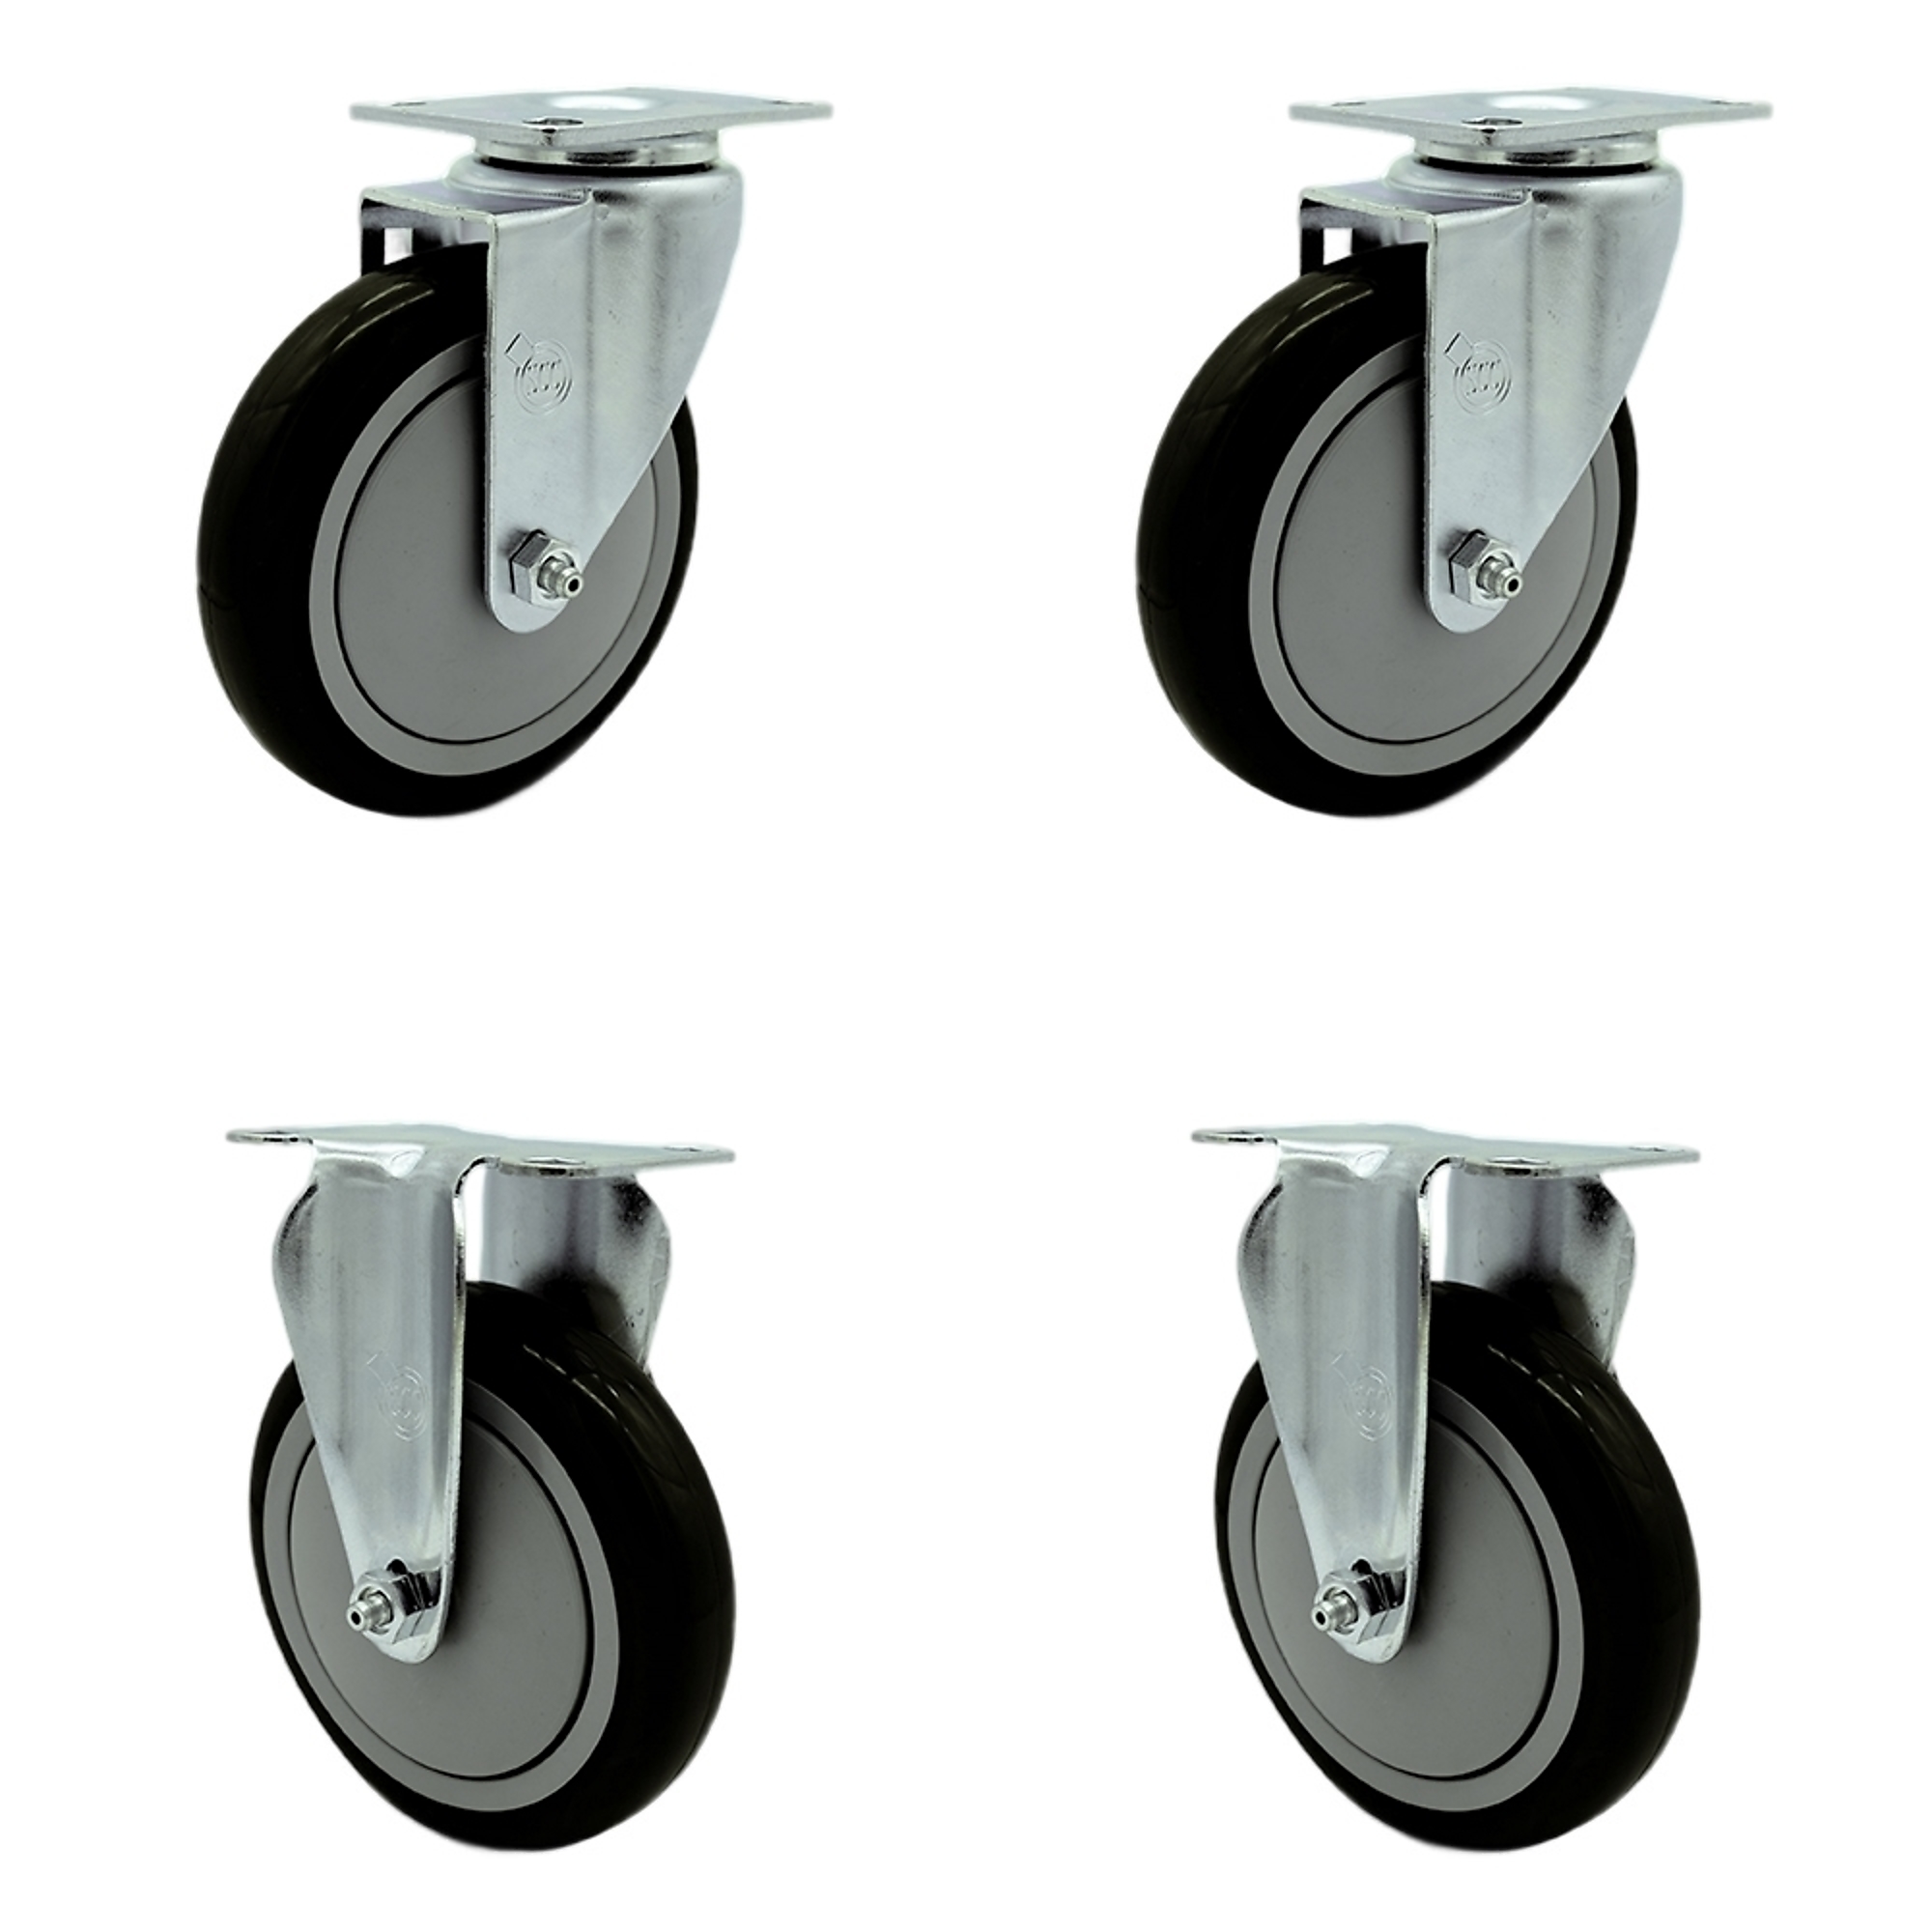 Service Caster, 5Inch x 1 1/4Inch Plate Casters, Wheel Diameter 5 in, Caster Type Swivel, Package (qty.) 4, Model SCC-20S514-PPUB-BLK-2-R514-2 -  670533884370